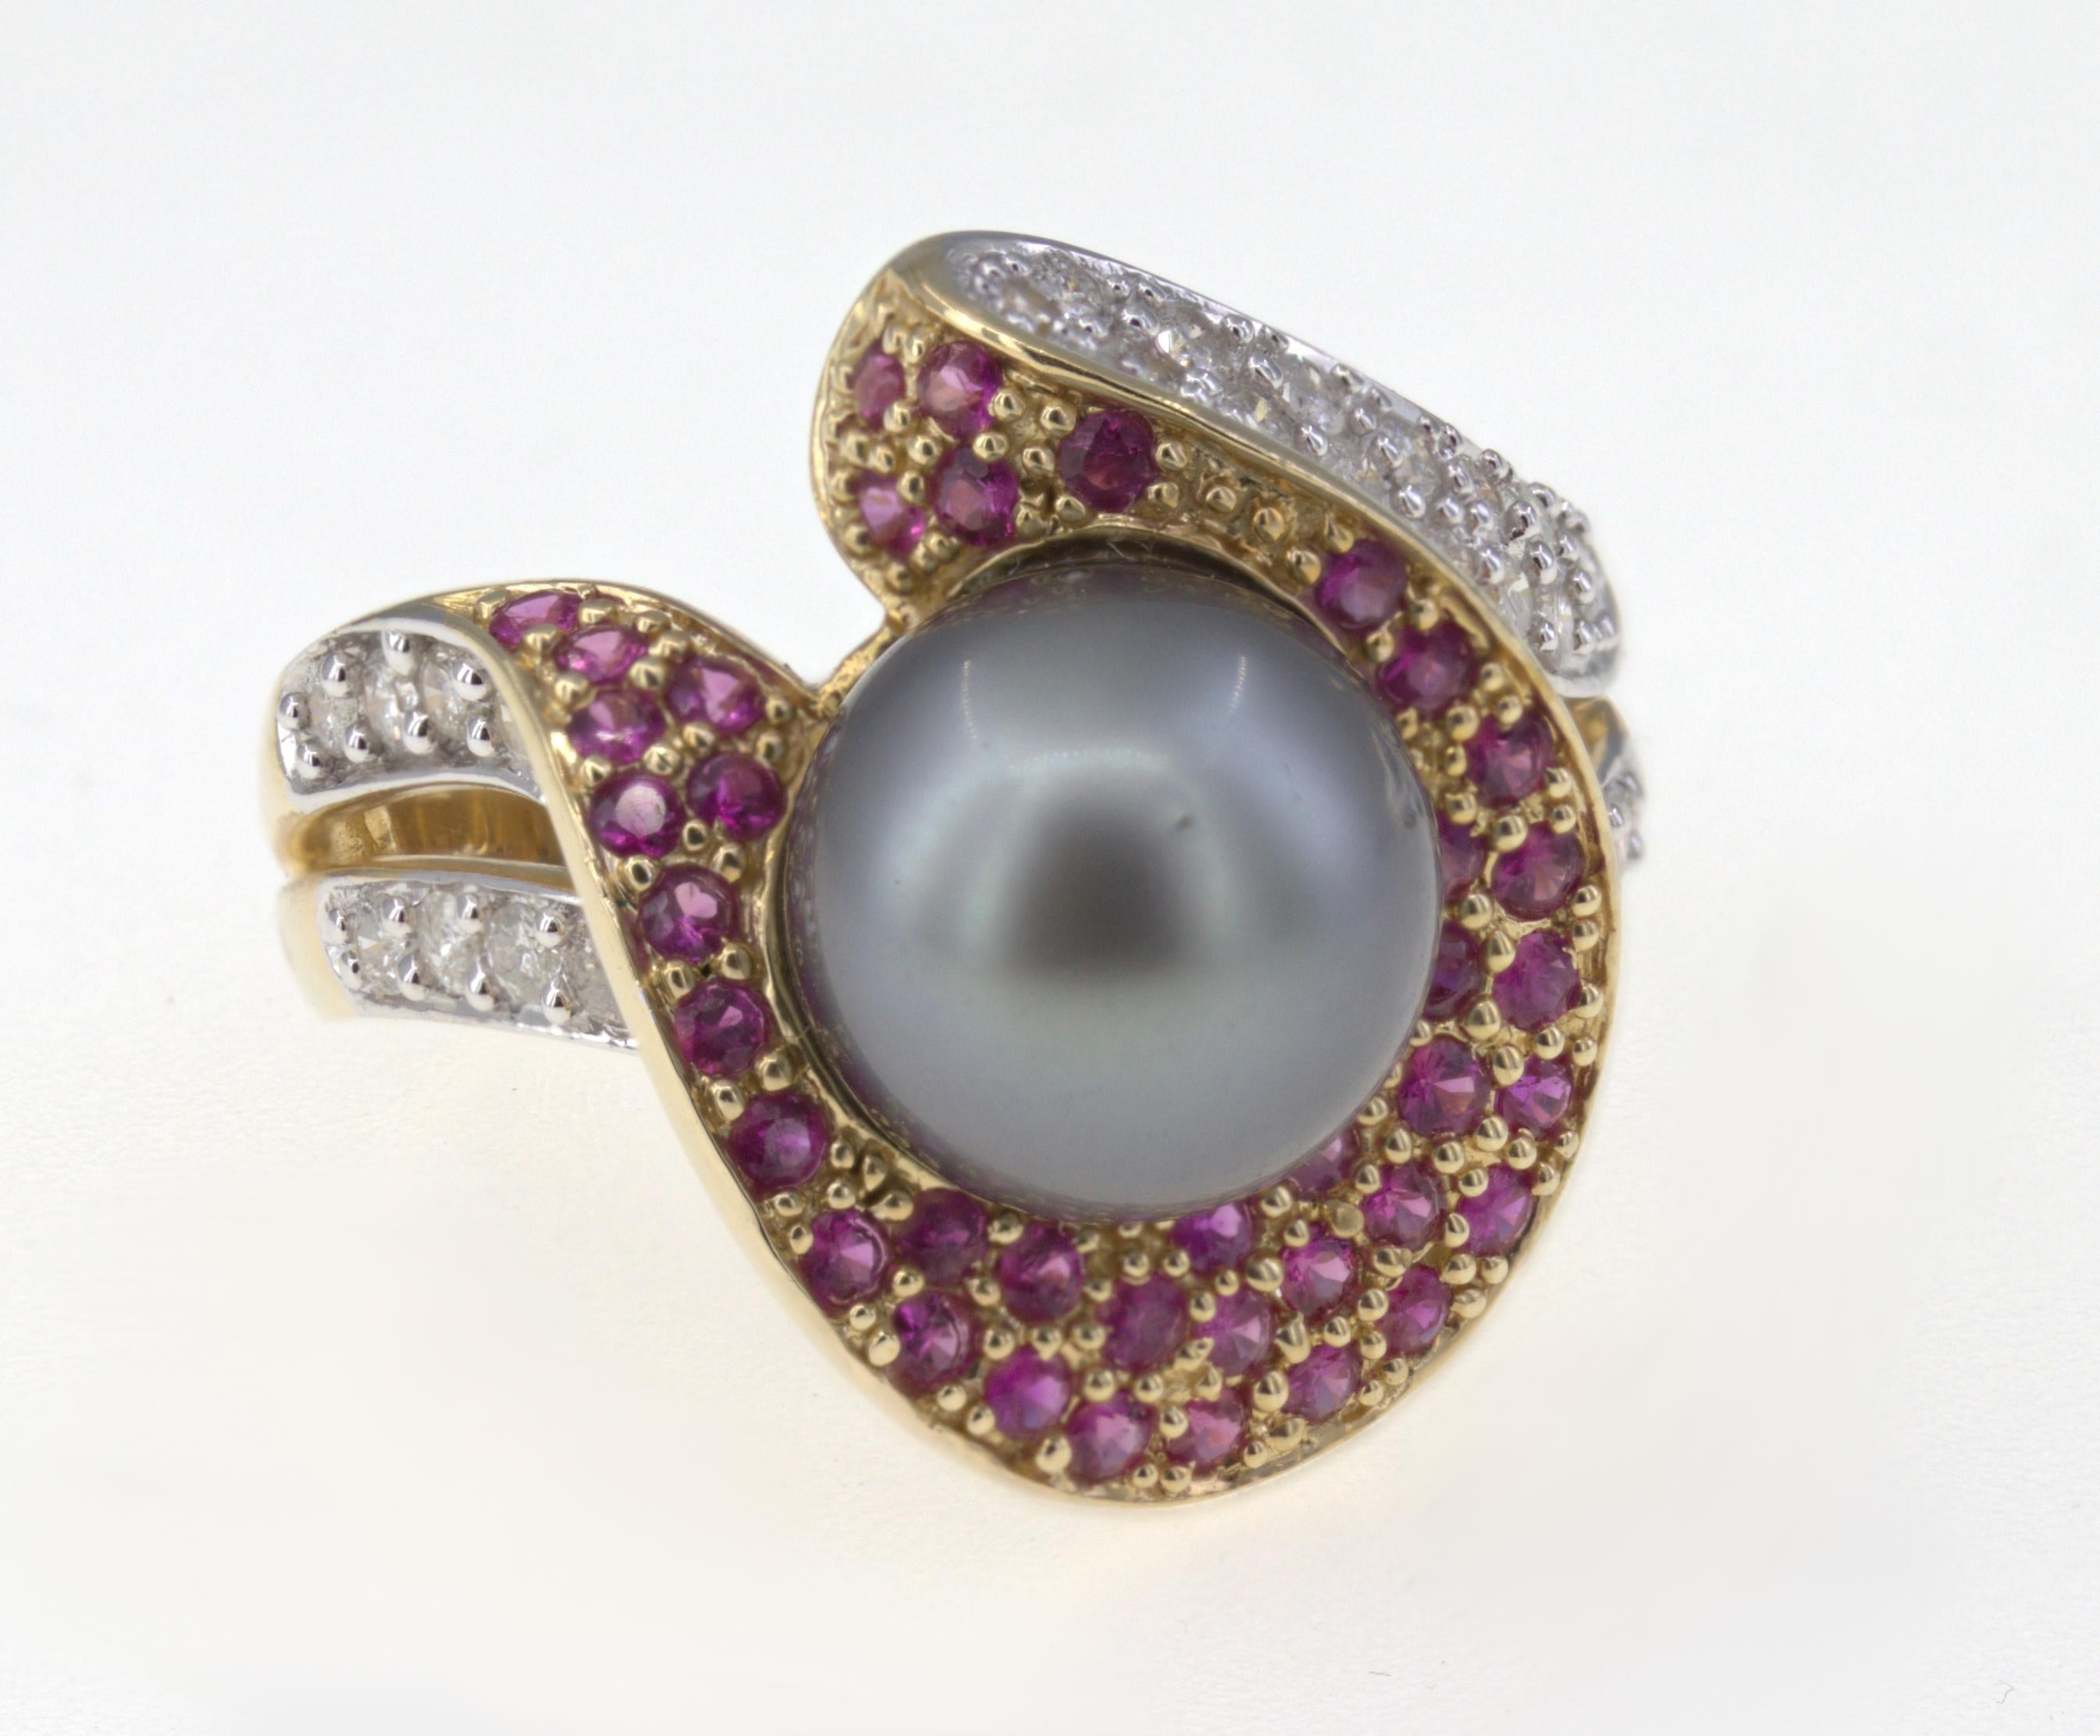 Featuring (1) gray Tahitian 9.8 mm, cultured pearl, surrounded by (42) round-cut rubies, 0.75 carat total weight, accented by (31) full-cut diamonds, 0.50  carat total weight I, H-I, pave set in a 14k yellow gold asymmetric sculpted mounting,